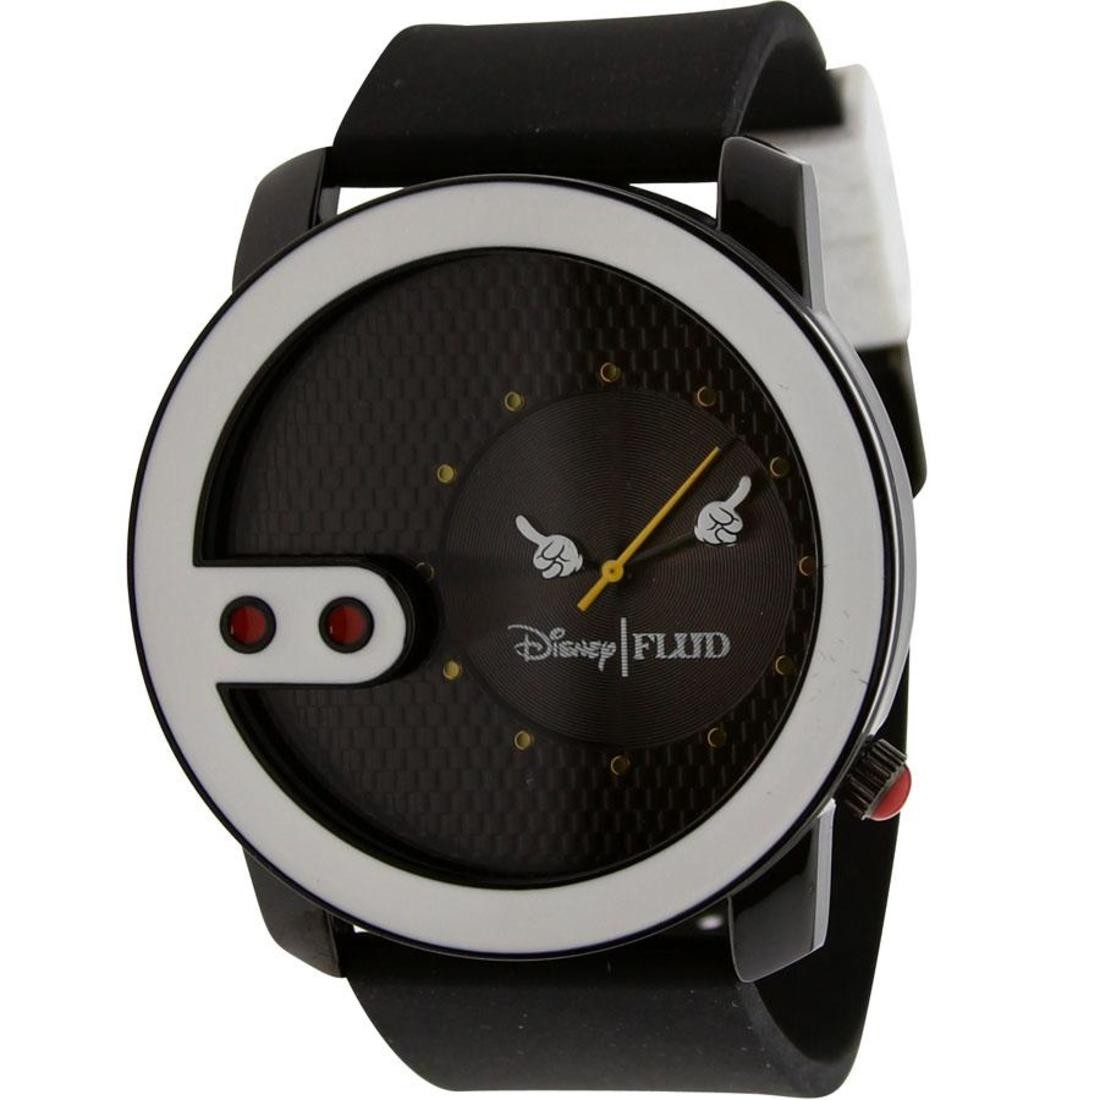 Aggregate 61+ flud watches